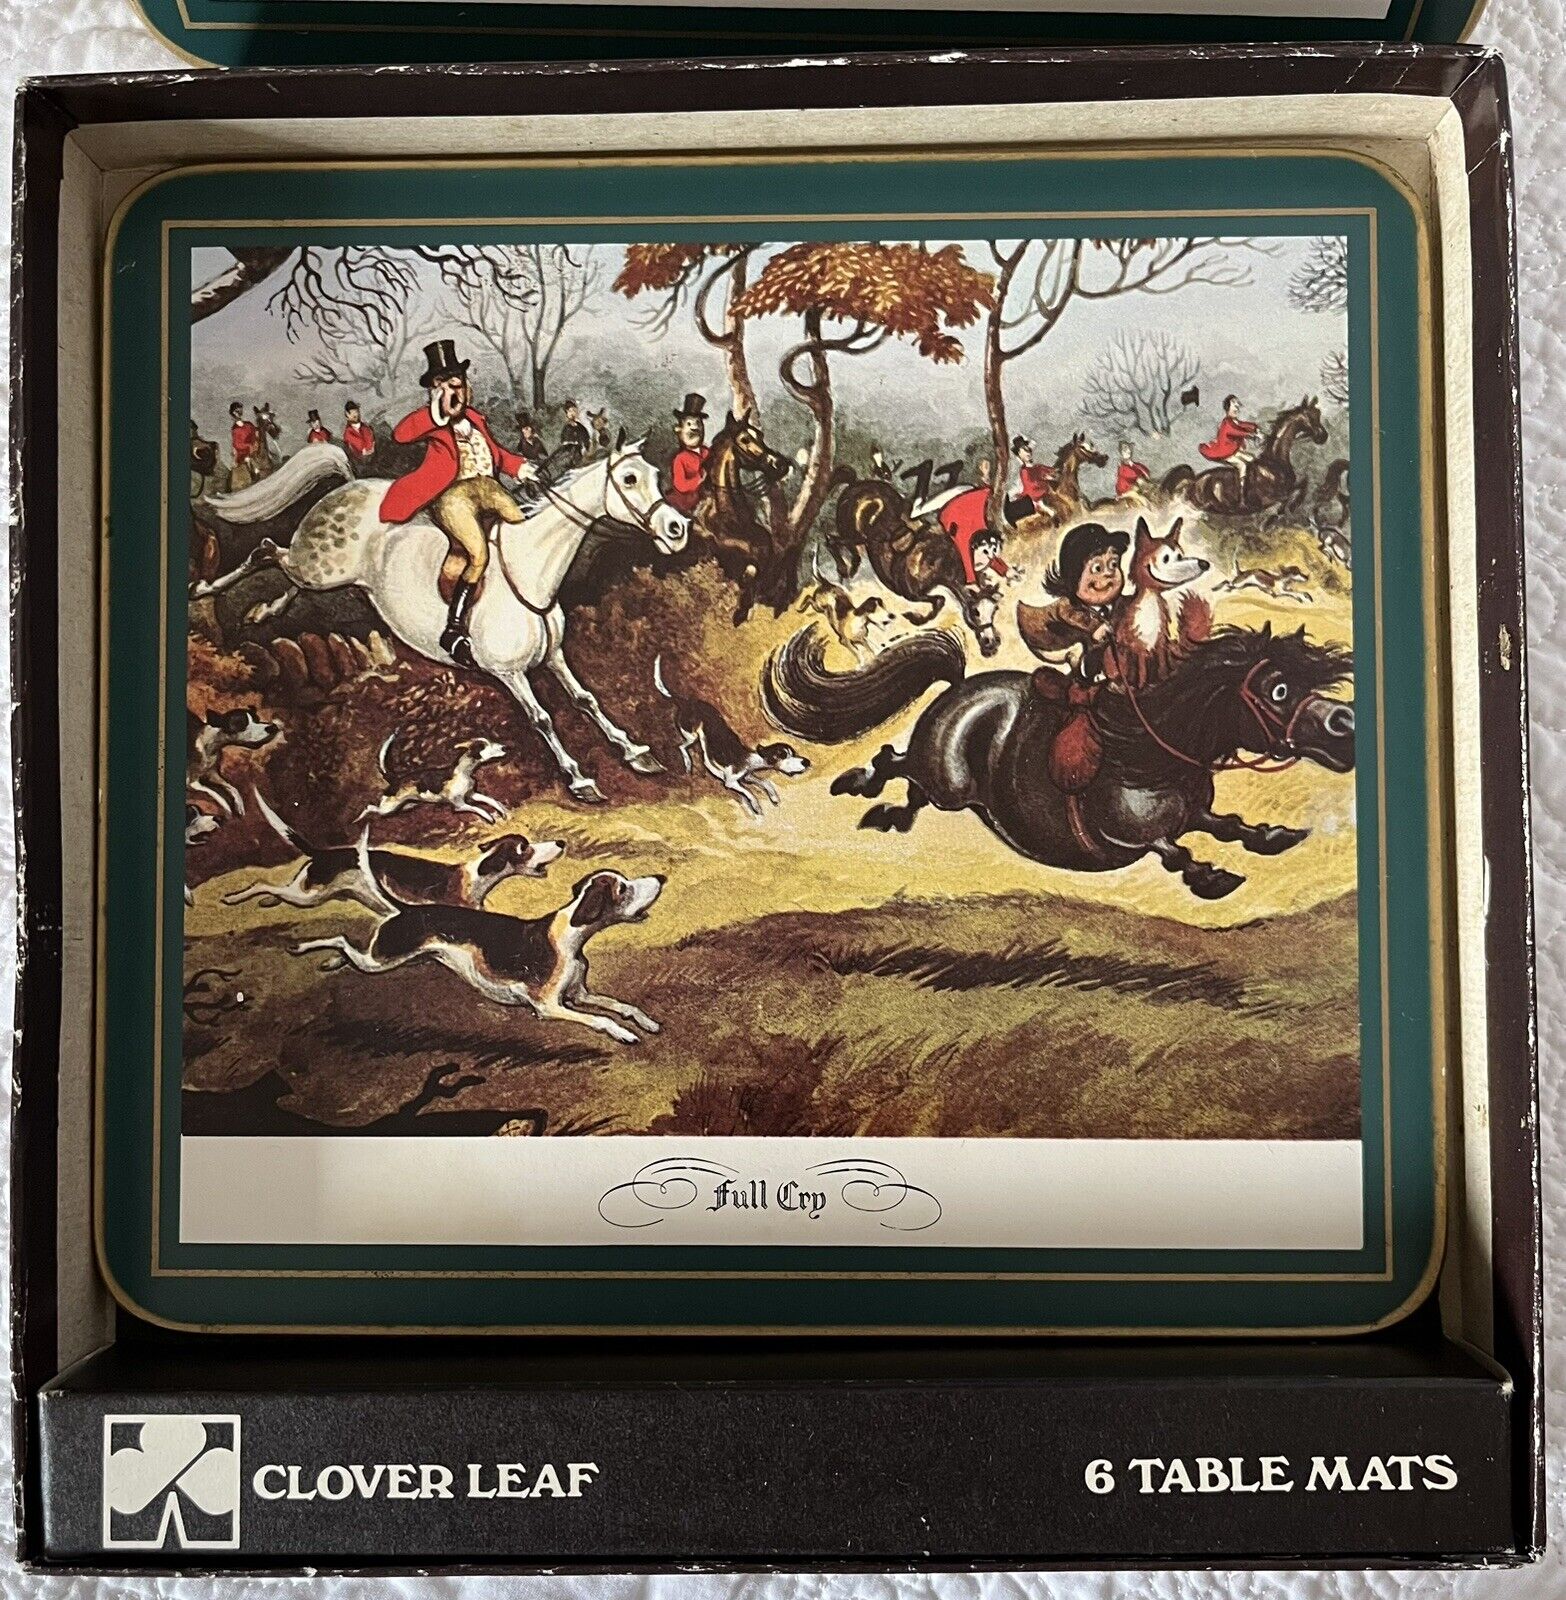 CLOVER LEAF Norman Thelwell Art 6 Cork Back Table Mats Made In England *VINTAGE*